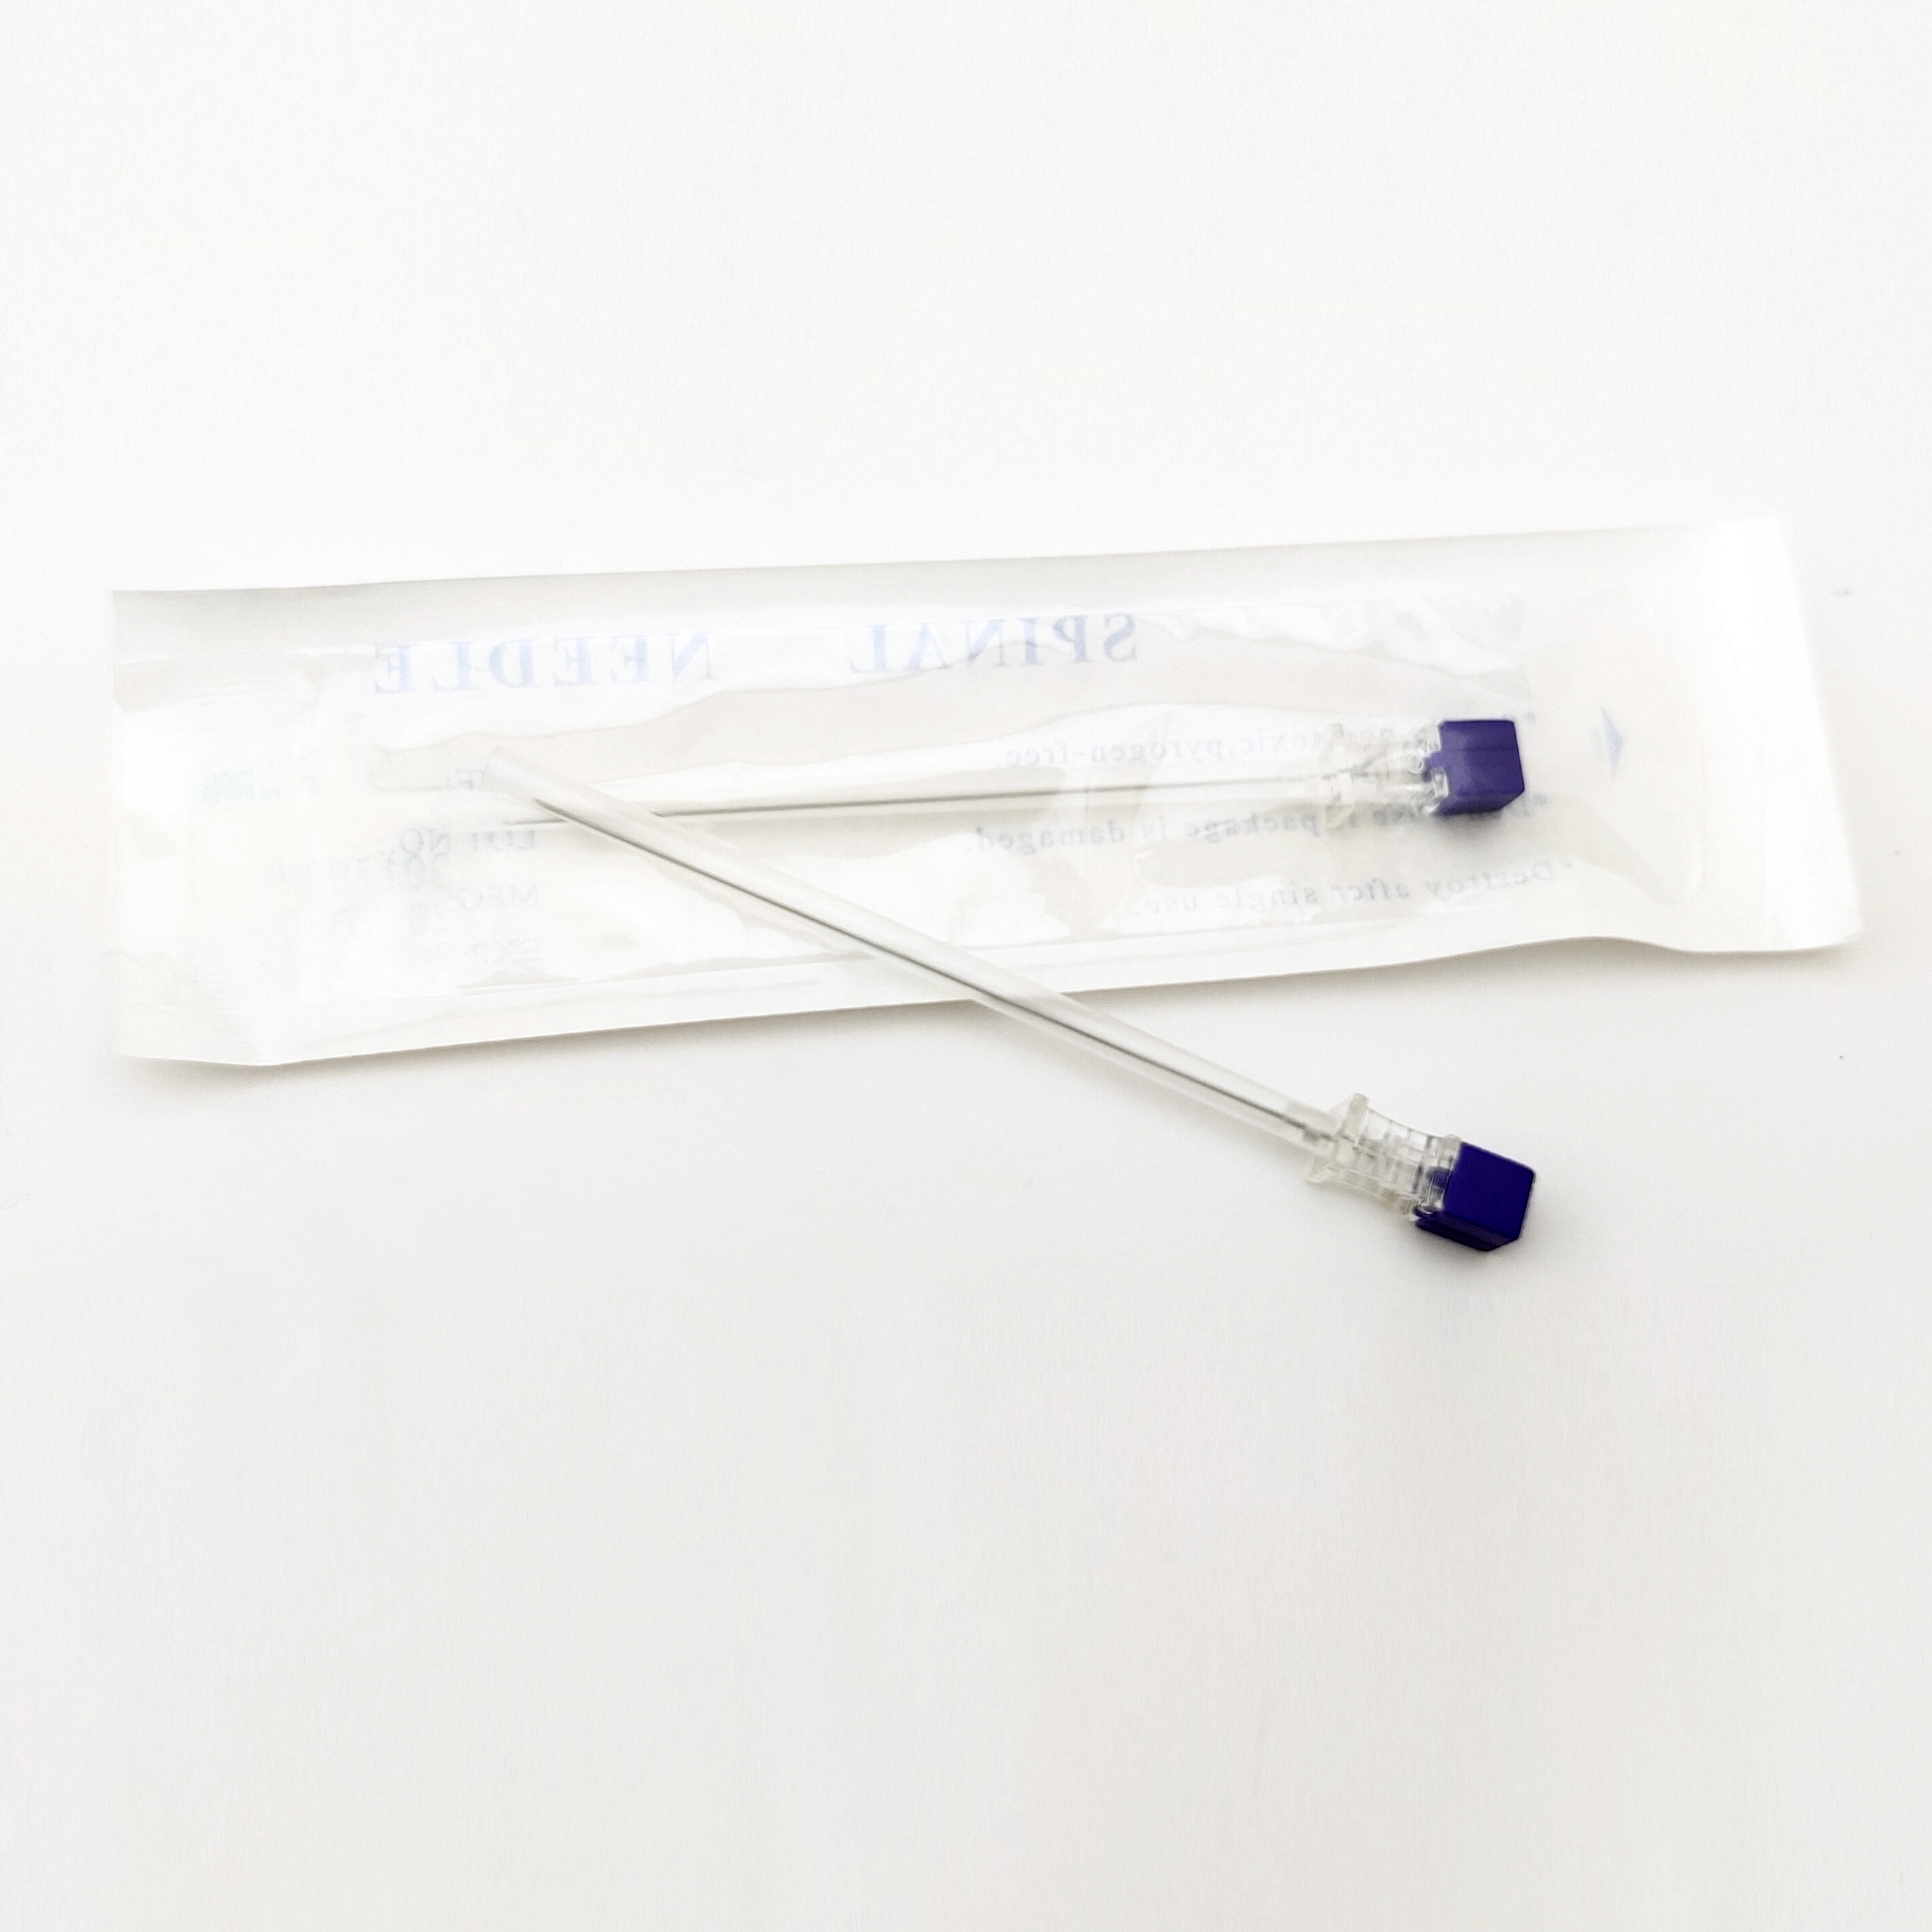 Spinal anesthesia needle 